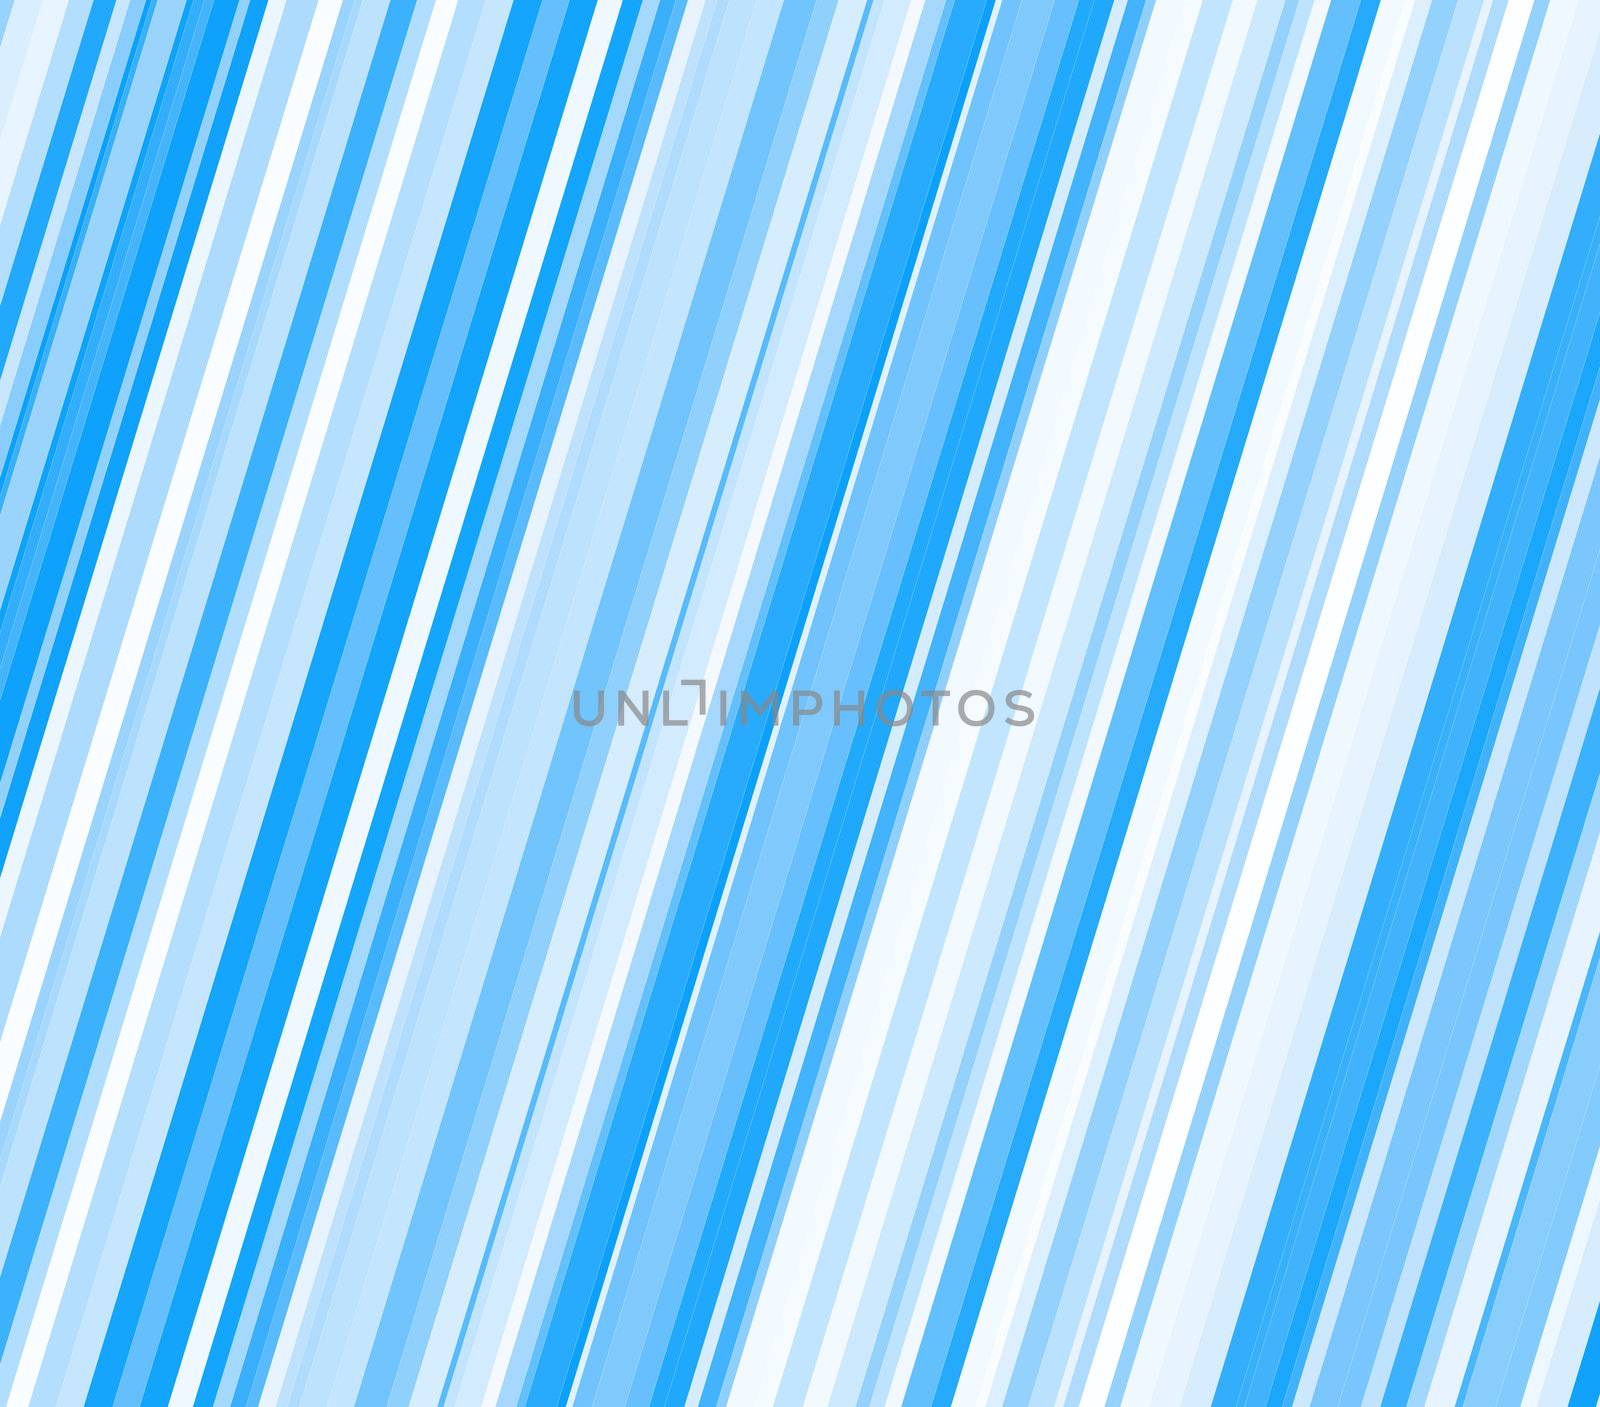 A background texture with blue and white diagonal stripes by lifeinapixel